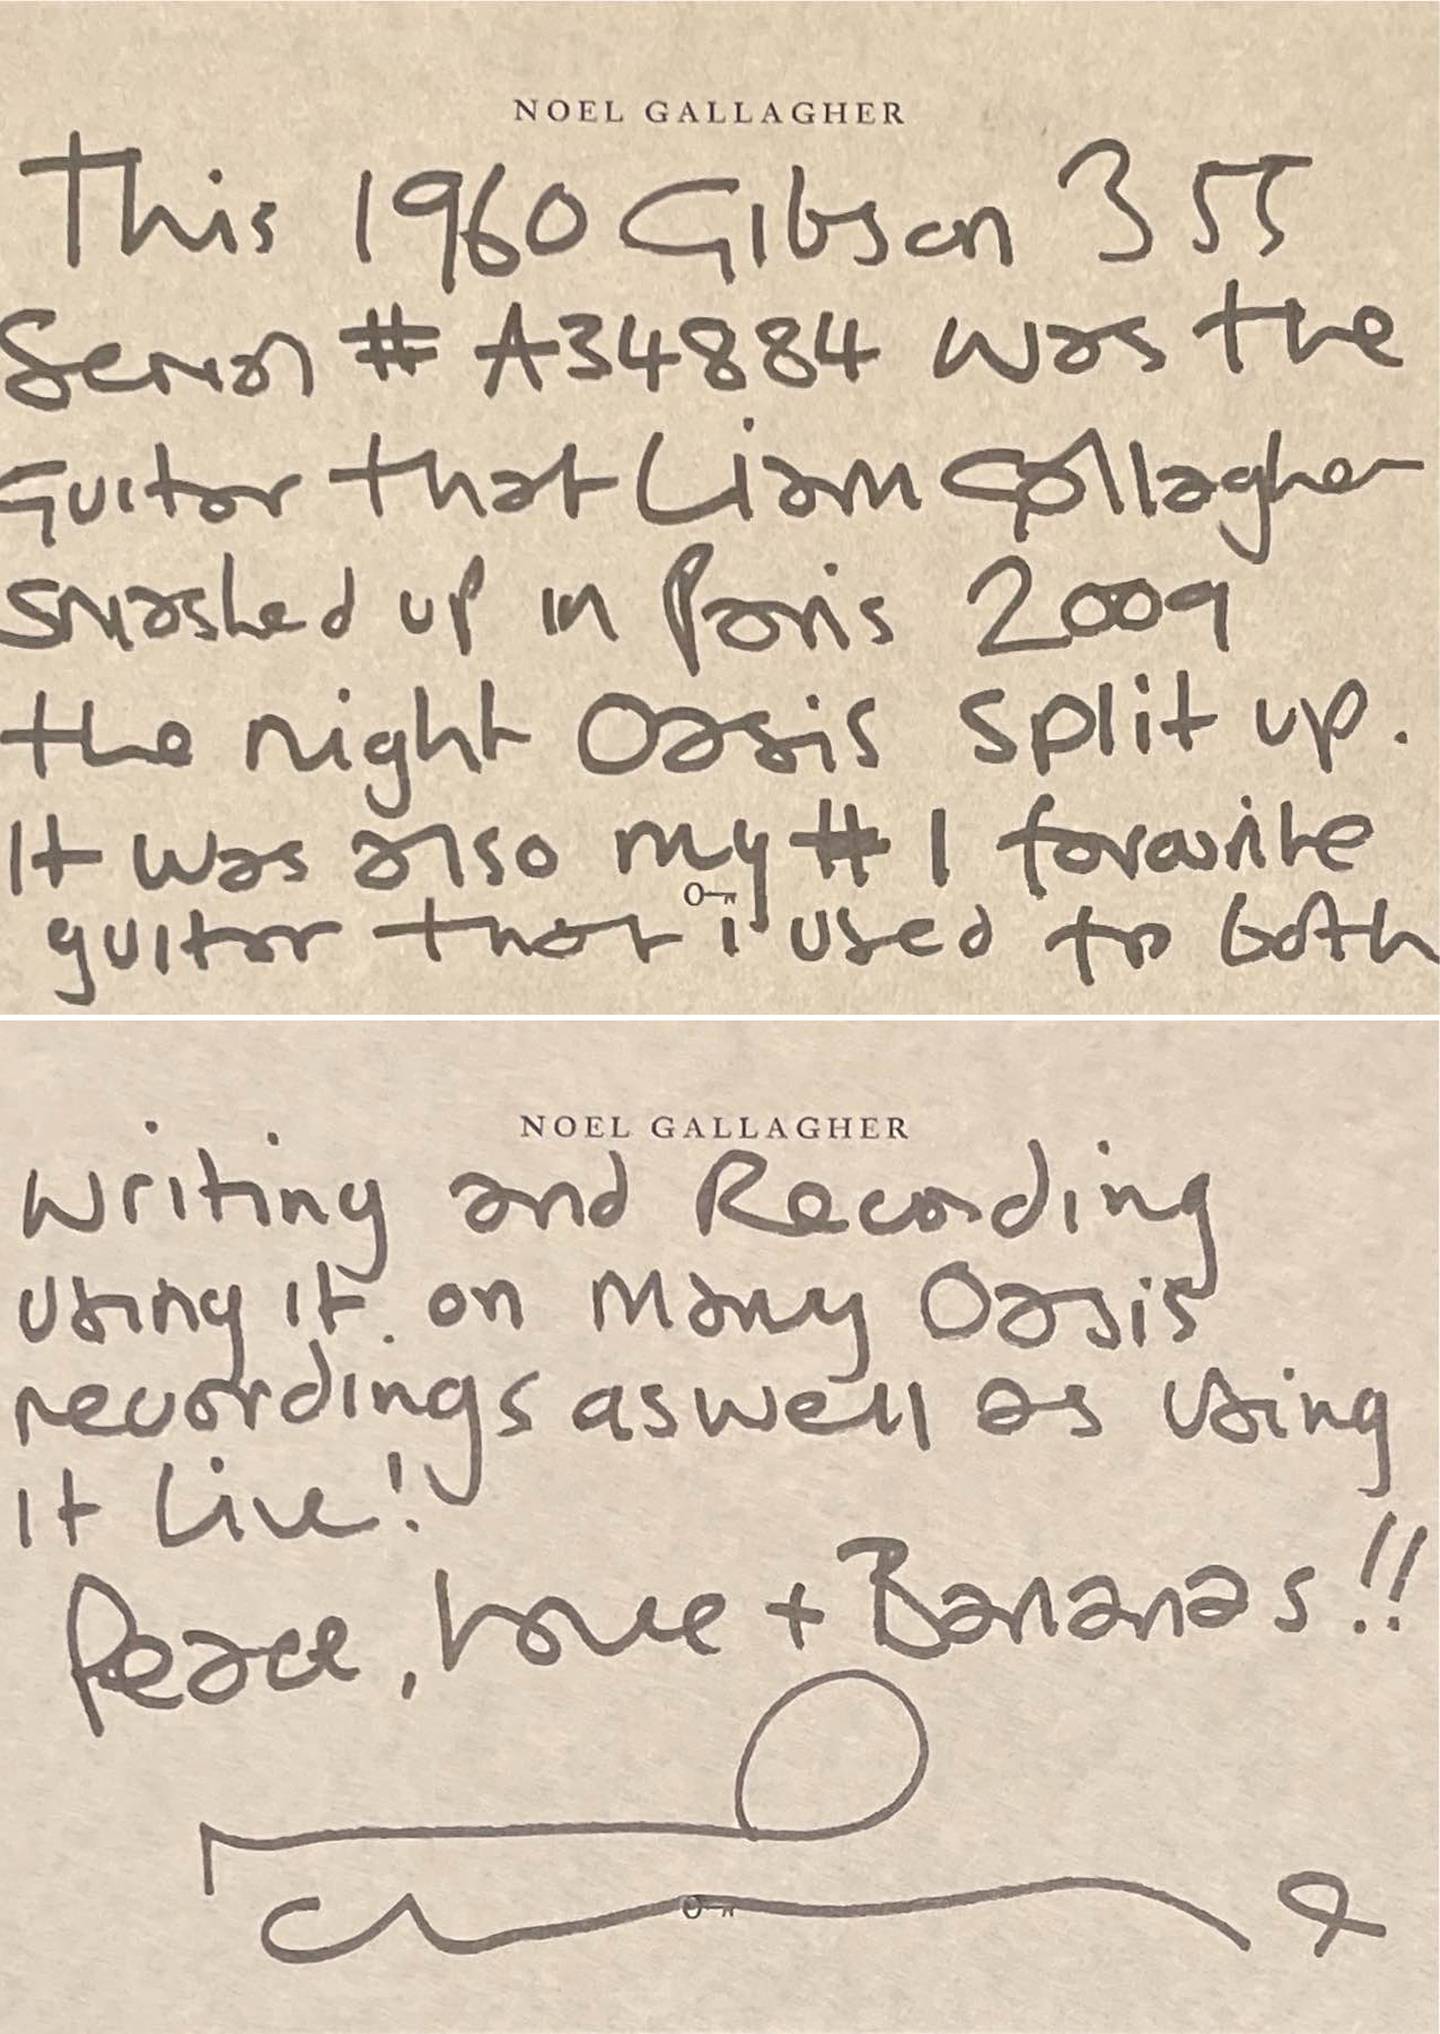 A note written by Noel Gallagher about the guitar. Photo: Philippe Dubreuille